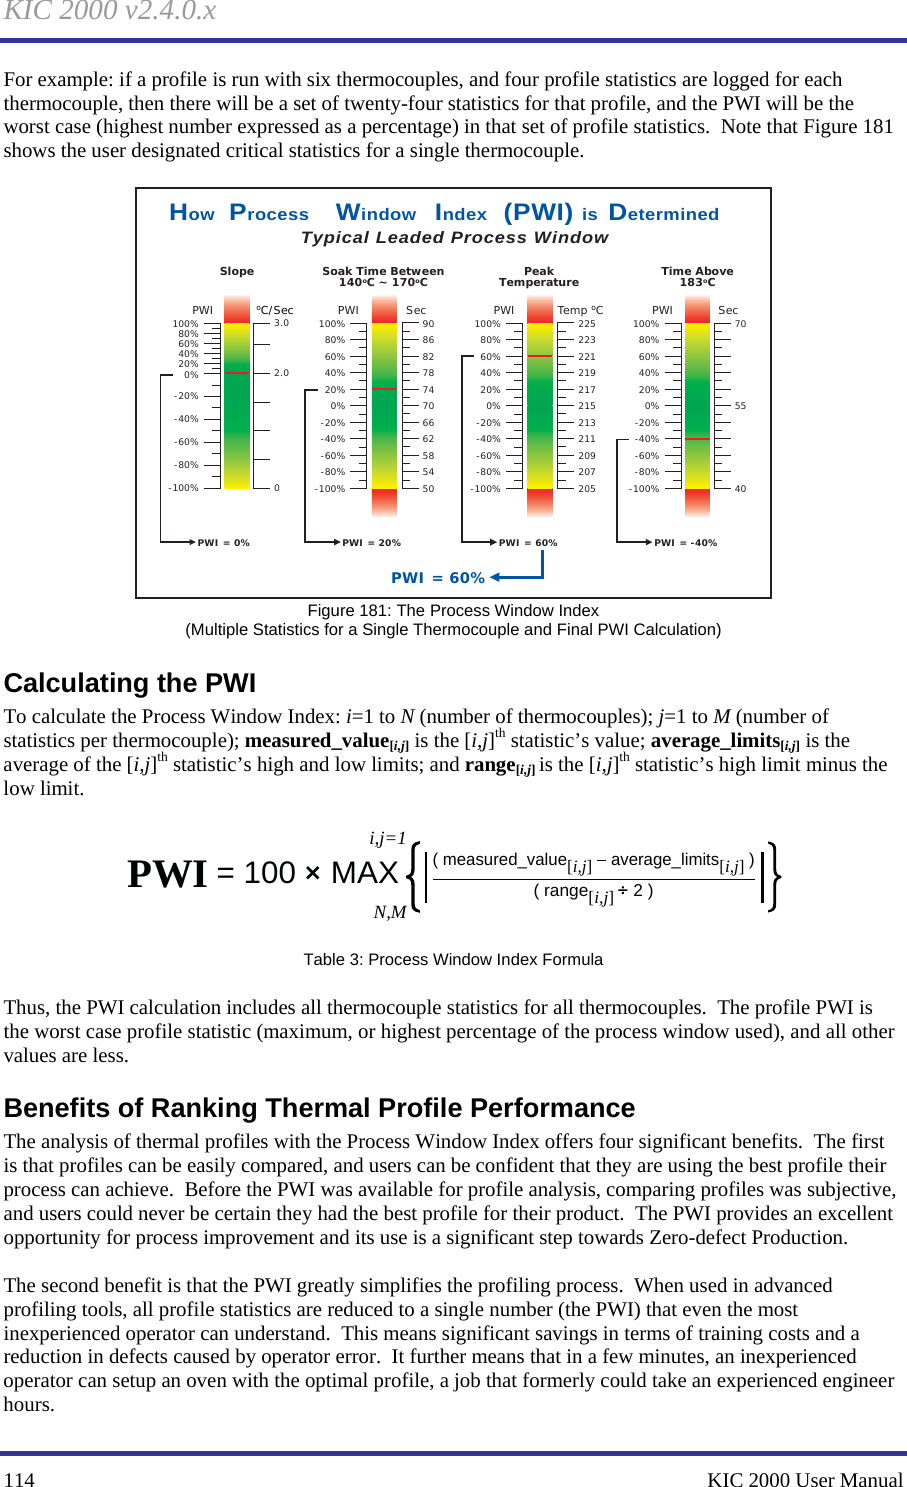 KIC 2000 v2.4.0.x 114    KIC 2000 User Manual For example: if a profile is run with six thermocouples, and four profile statistics are logged for each thermocouple, then there will be a set of twenty-four statistics for that profile, and the PWI will be the worst case (highest number expressed as a percentage) in that set of profile statistics.  Note that Figure 181 shows the user designated critical statistics for a single thermocouple.    100%80%60%40%20%0%-20%-40%-60%-80%-100%705540PWI SecTime Above183oC100%80%60%40%20%0%-20%-40%-60%-80%-100%225223221219217215213211209207205PWI Temp oCPeakTemperature100%80%60%40%20%0%-20%-40%-60%-80%-100%9086827874706662585450PWI SecSoak Time Between140oC ~ 170oC02.03.0100%80%60%40%20%0%-20%-40%-60%-80%-100%PWI oC/SecSlopePWI = 0% PWI = 20%PWI = 60%PWI = -40%PWI = 60%Typical Leaded Process WindowHow  Process  Window  Index  (PWI) is Determined Figure 181: The Process Window Index (Multiple Statistics for a Single Thermocouple and Final PWI Calculation) Calculating the PWI To calculate the Process Window Index: i=1 to N (number of thermocouples); j=1 to M (number of statistics per thermocouple); measured_value[i,j] is the [i,j]th statistic’s value; average_limits[i,j] is the average of the [i,j]th statistic’s high and low limits; and range[i,j] is the [i,j]th statistic’s high limit minus the low limit.  ( measured_value[i,j]    average_limits[i,j] )( range[i,j]    2 )i,j=1N,M= 100    MAXPWI Table 3: Process Window Index Formula  Thus, the PWI calculation includes all thermocouple statistics for all thermocouples.  The profile PWI is the worst case profile statistic (maximum, or highest percentage of the process window used), and all other values are less. Benefits of Ranking Thermal Profile Performance The analysis of thermal profiles with the Process Window Index offers four significant benefits.  The first is that profiles can be easily compared, and users can be confident that they are using the best profile their process can achieve.  Before the PWI was available for profile analysis, comparing profiles was subjective, and users could never be certain they had the best profile for their product.  The PWI provides an excellent opportunity for process improvement and its use is a significant step towards Zero-defect Production.  The second benefit is that the PWI greatly simplifies the profiling process.  When used in advanced profiling tools, all profile statistics are reduced to a single number (the PWI) that even the most inexperienced operator can understand.  This means significant savings in terms of training costs and a reduction in defects caused by operator error.  It further means that in a few minutes, an inexperienced operator can setup an oven with the optimal profile, a job that formerly could take an experienced engineer hours. 